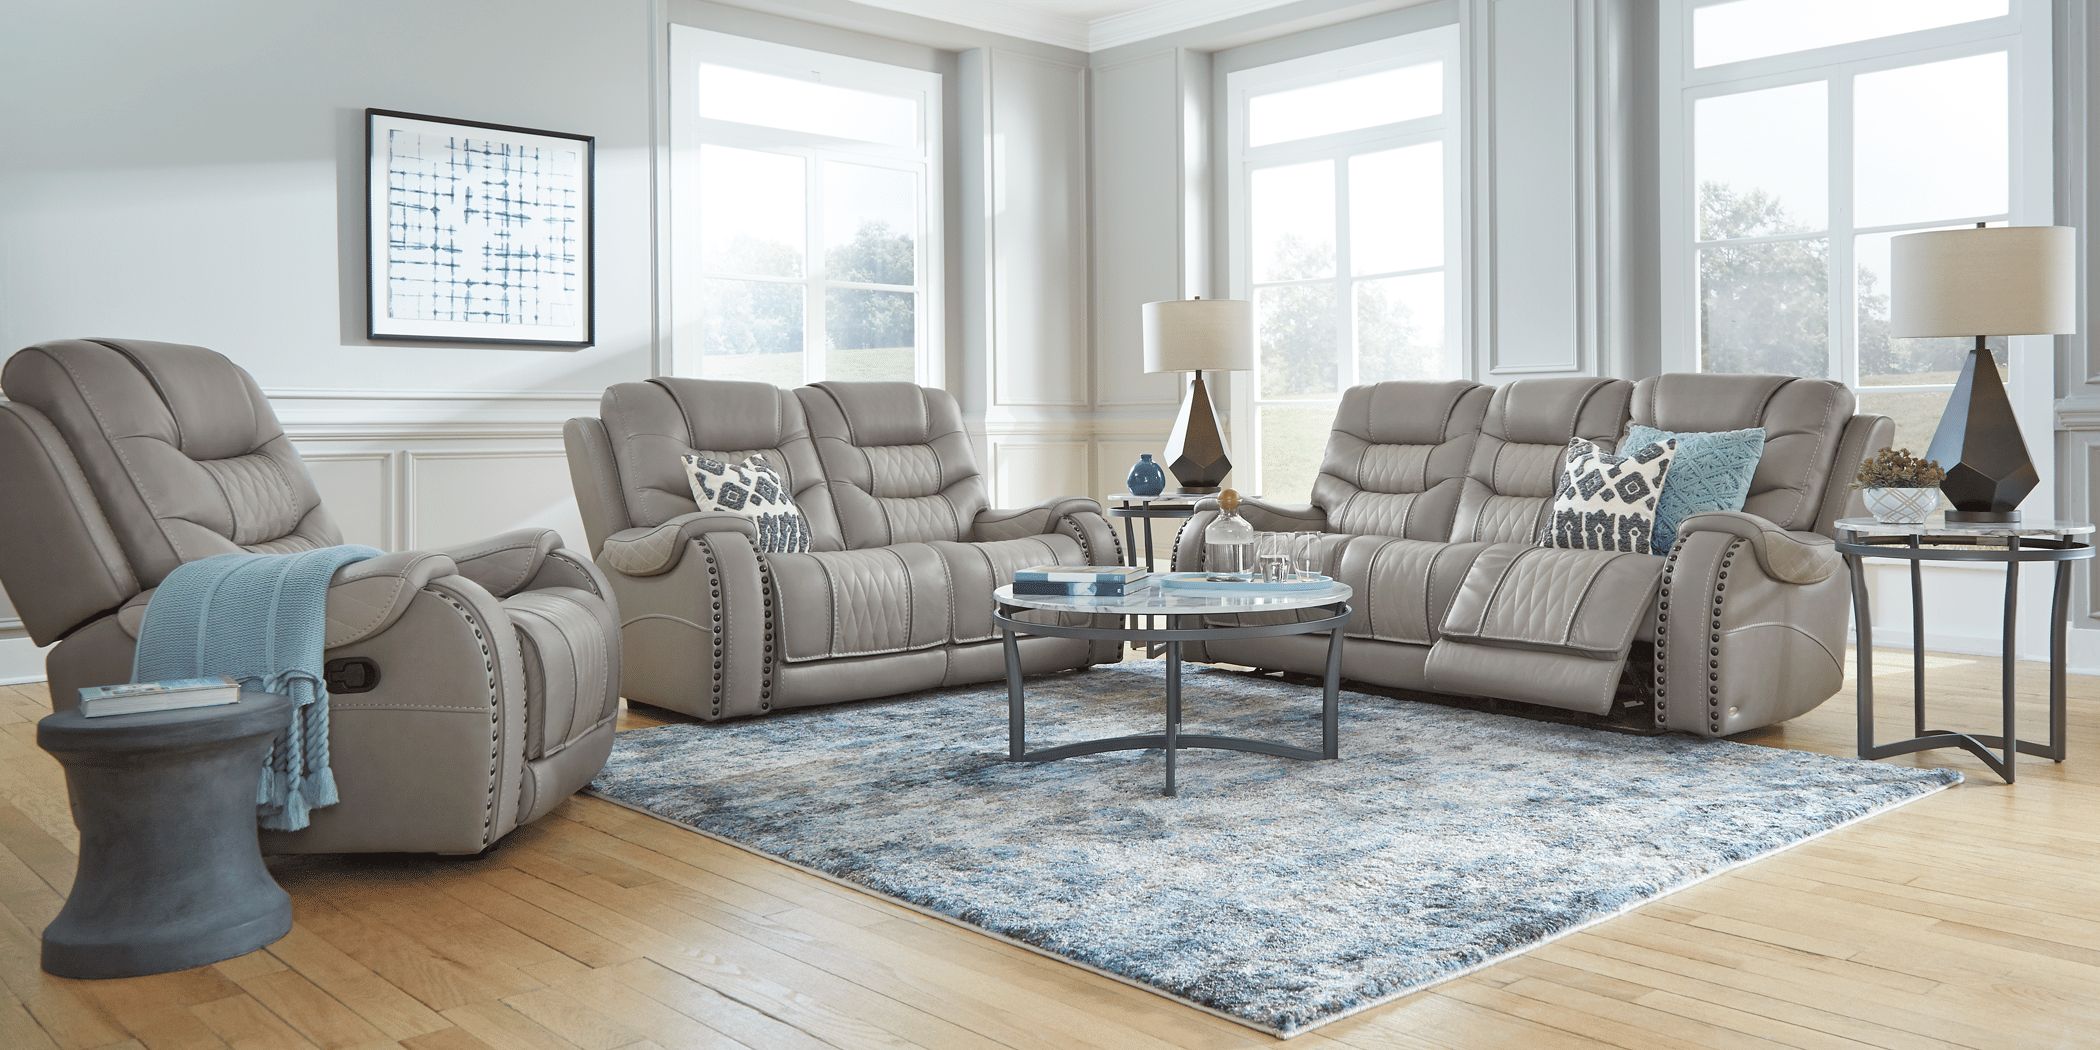 Grey Leather Living Room Sets Gray, Gray Leather Living Room Furniture